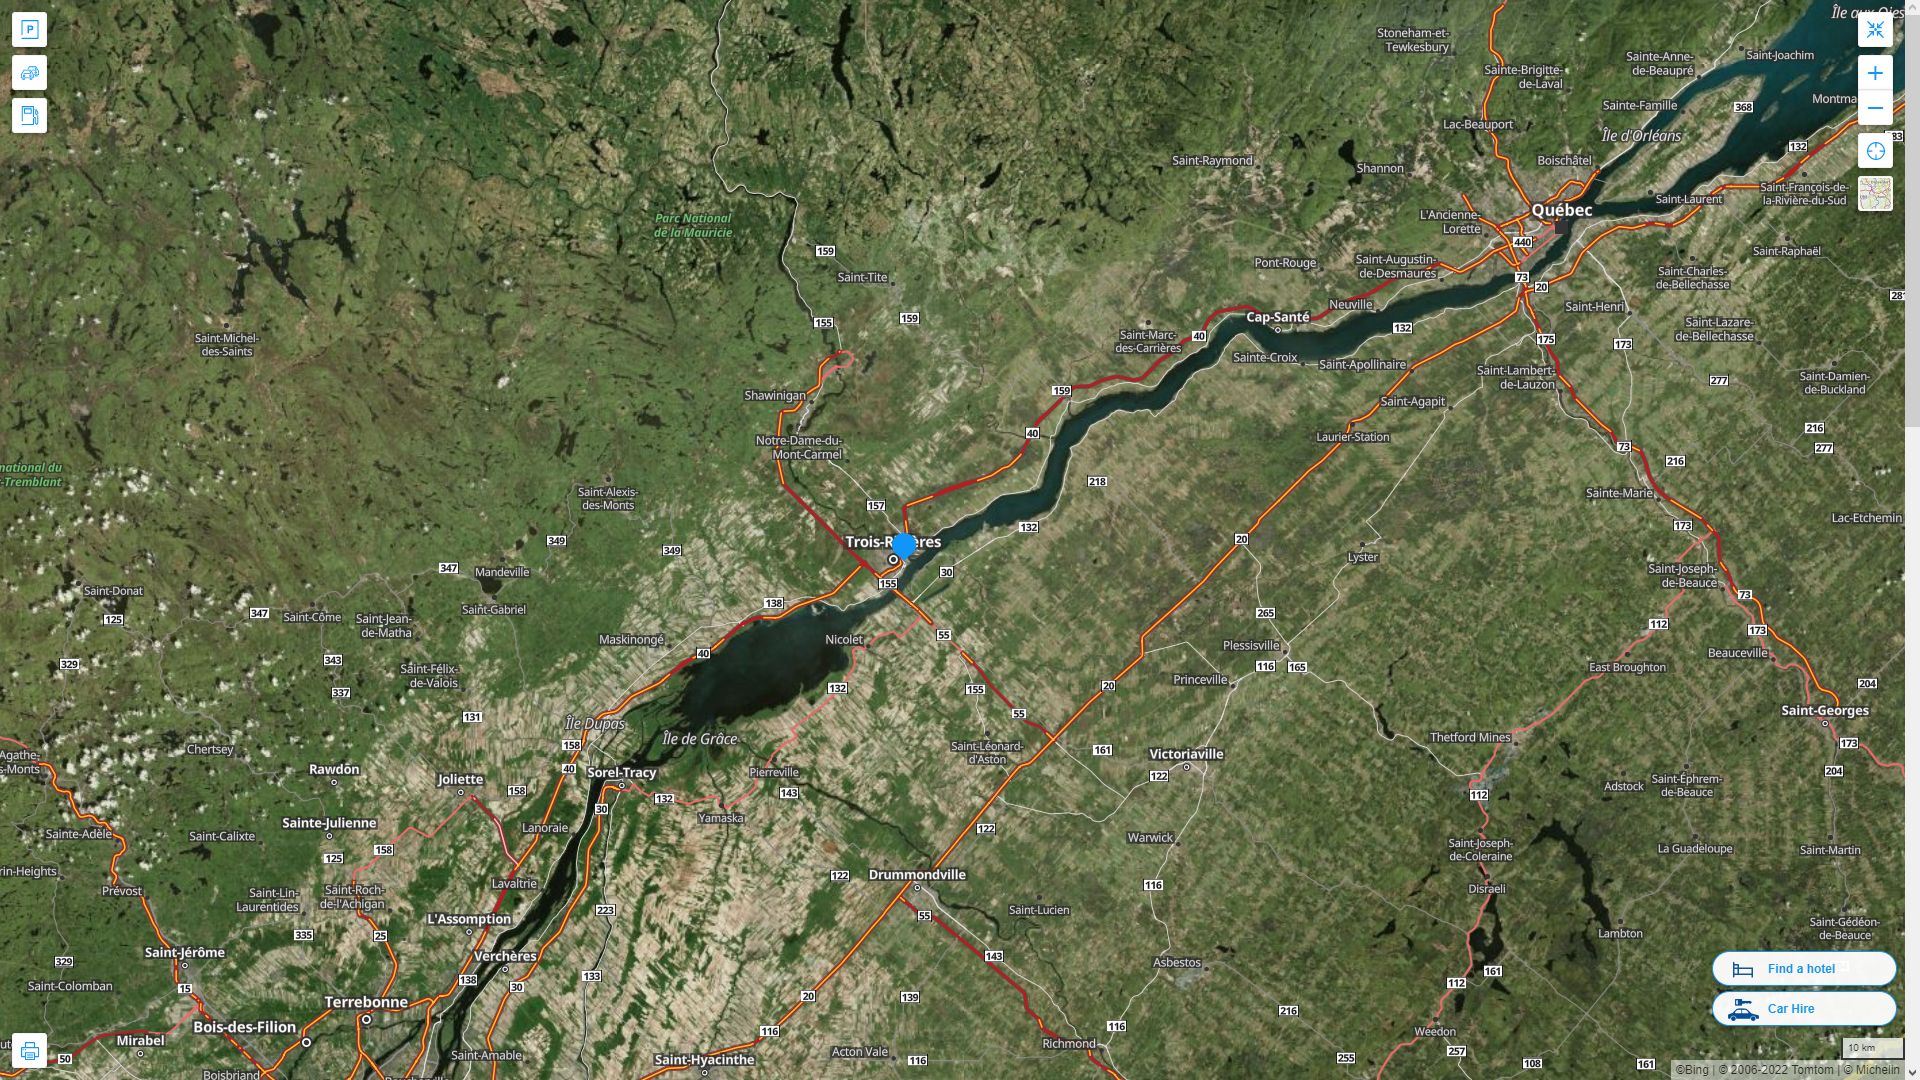 Trois Rivieres Highway and Road Map with Satellite View